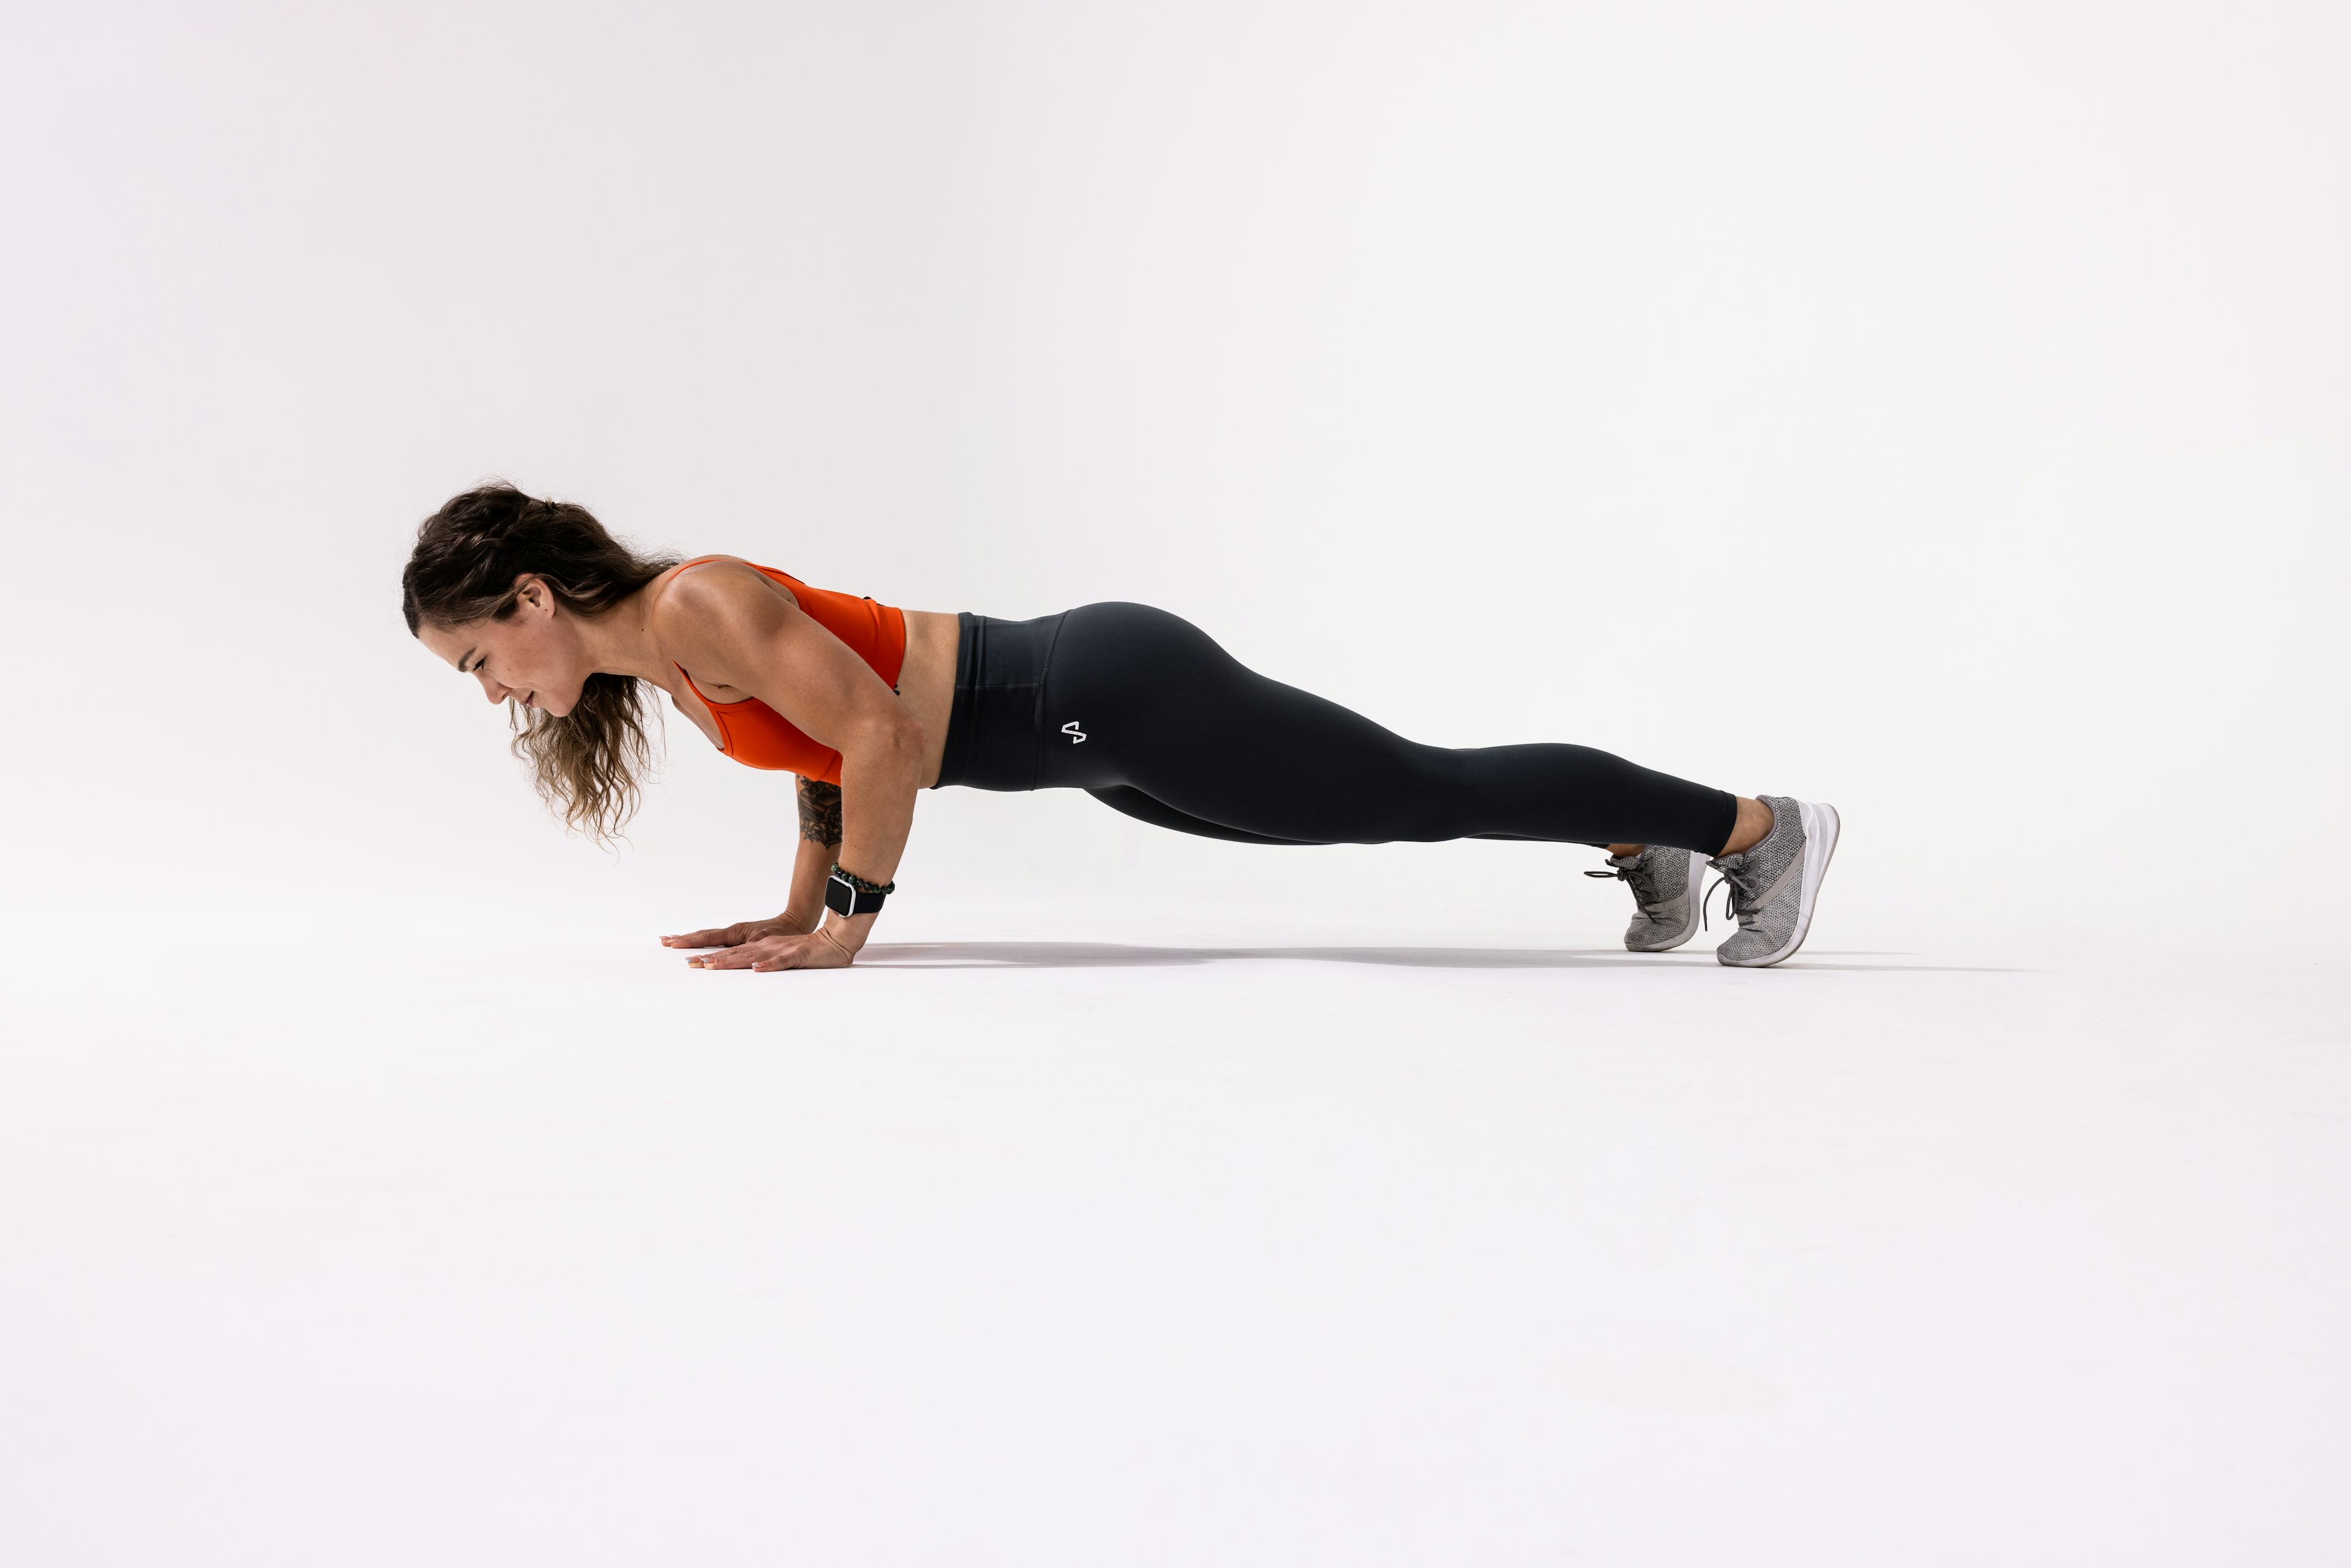 How to Perform a Proper Push-up